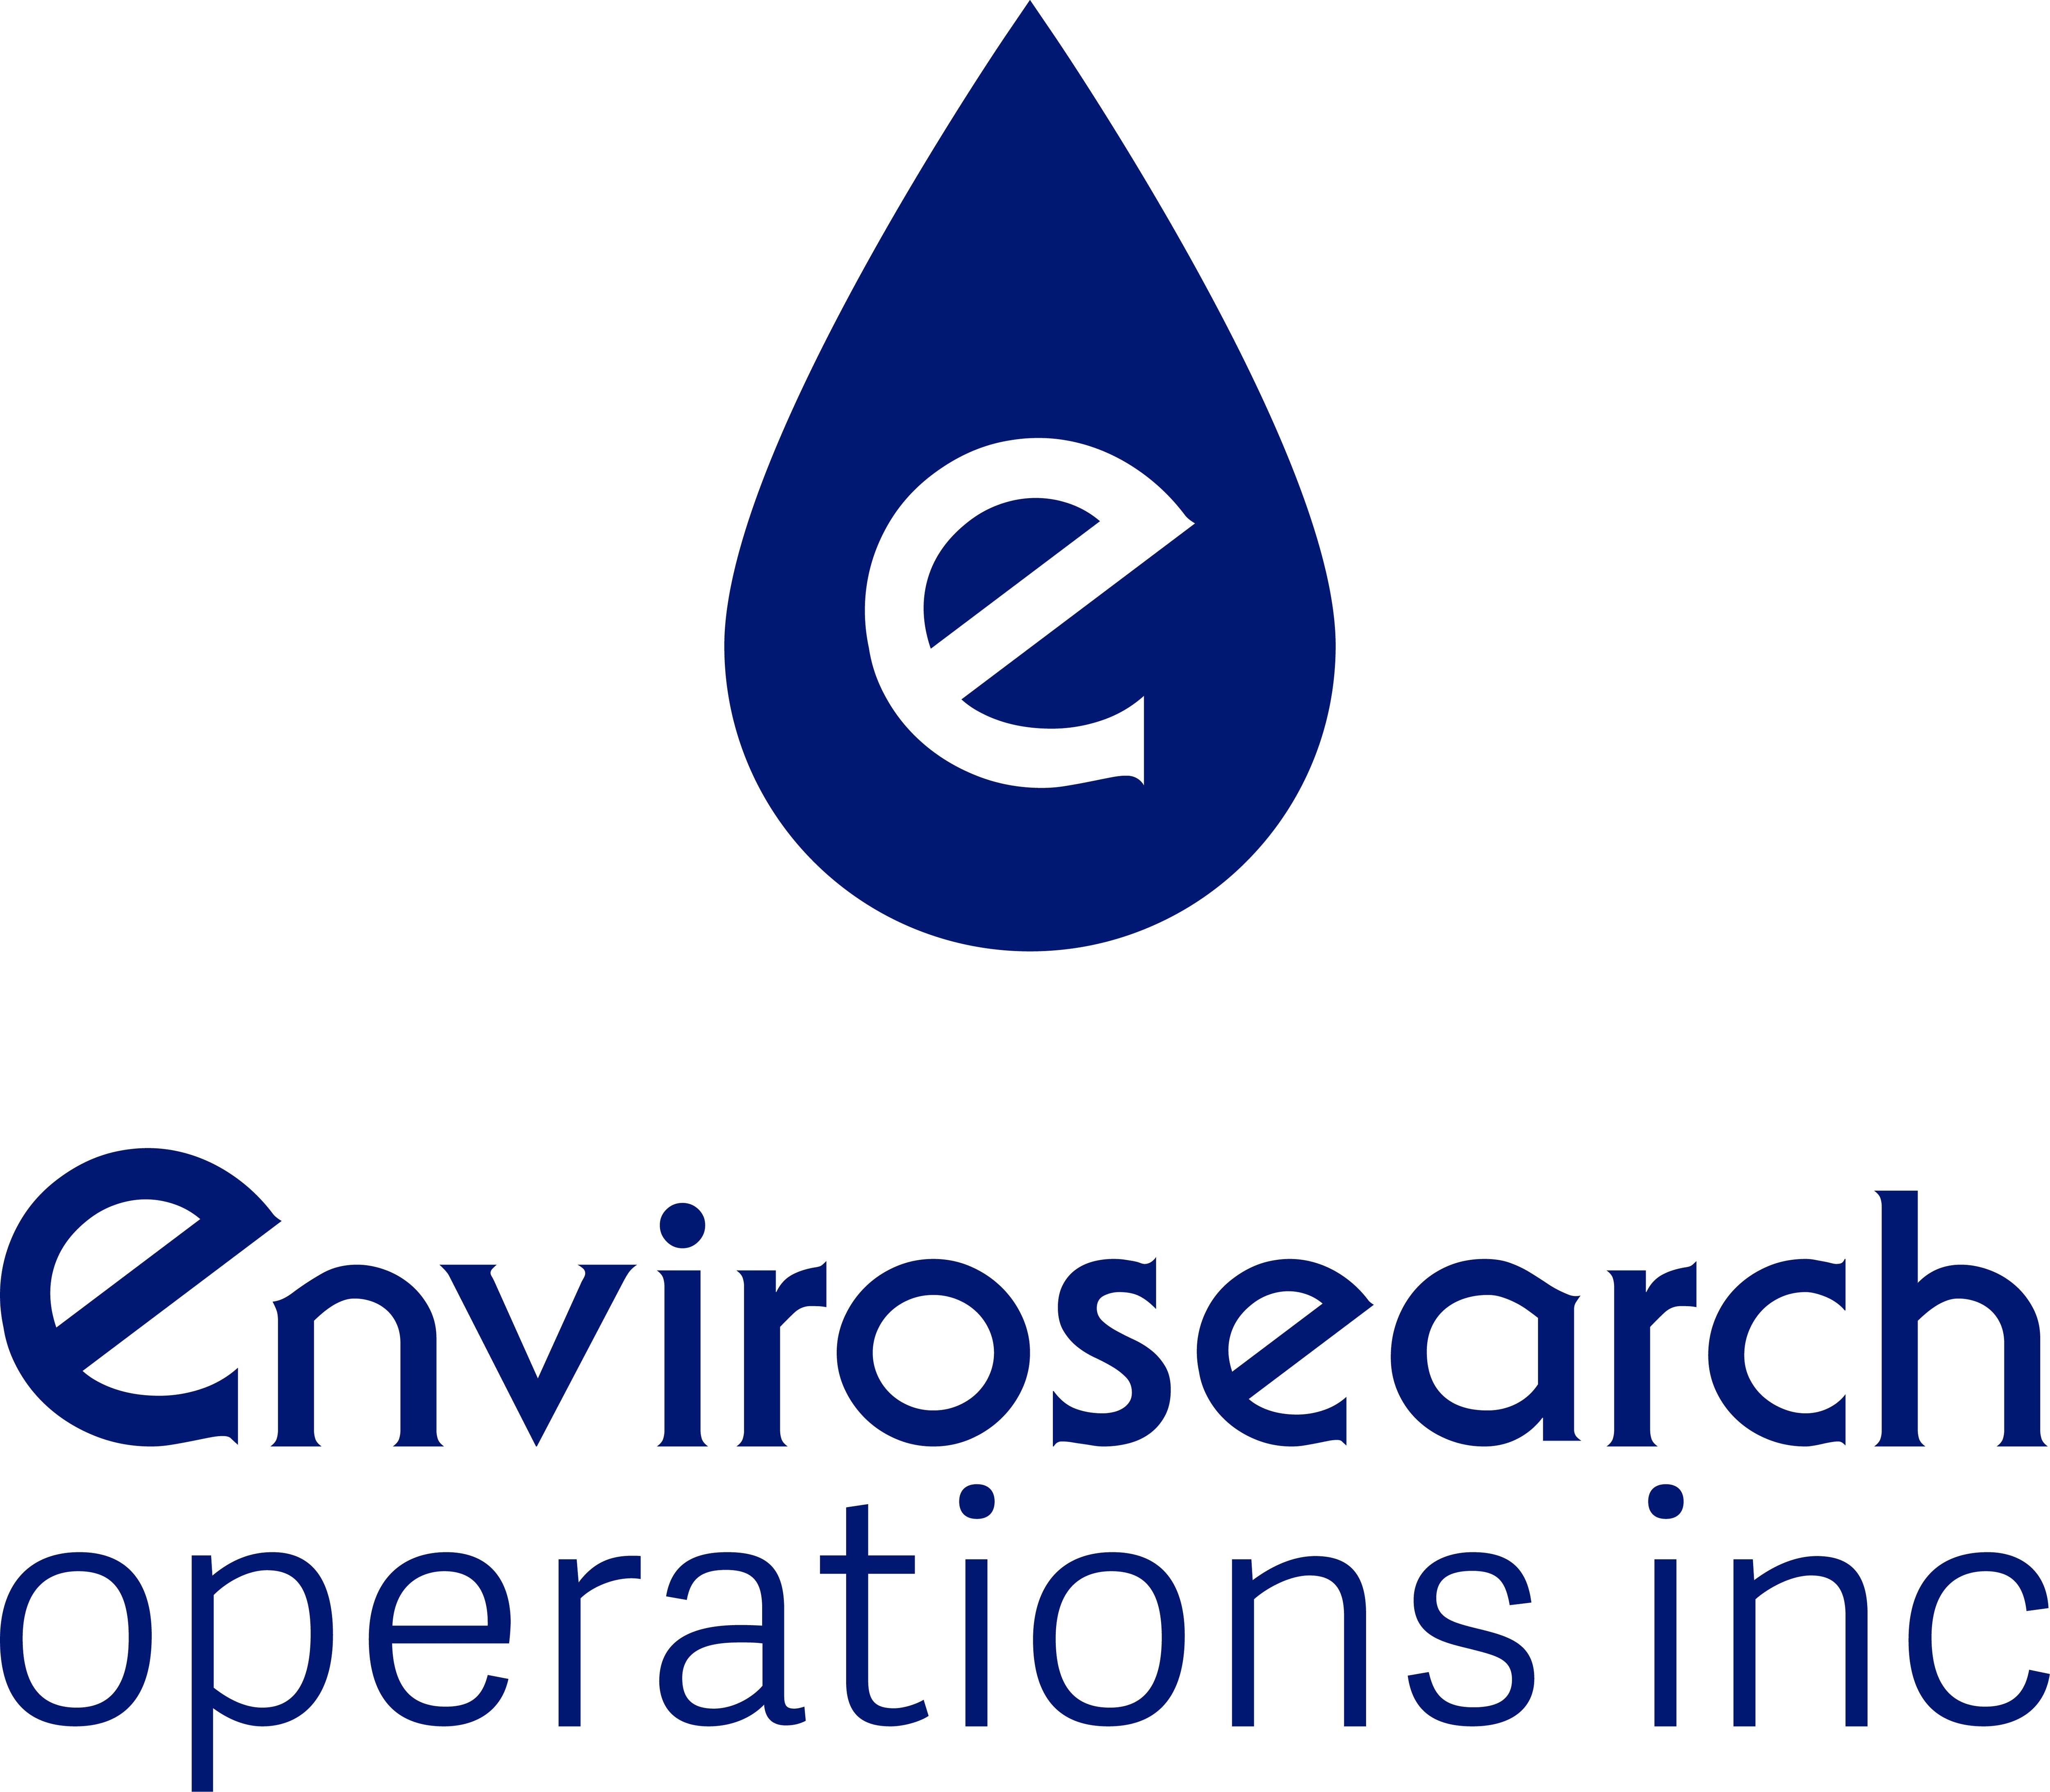 Envirosearch Operations